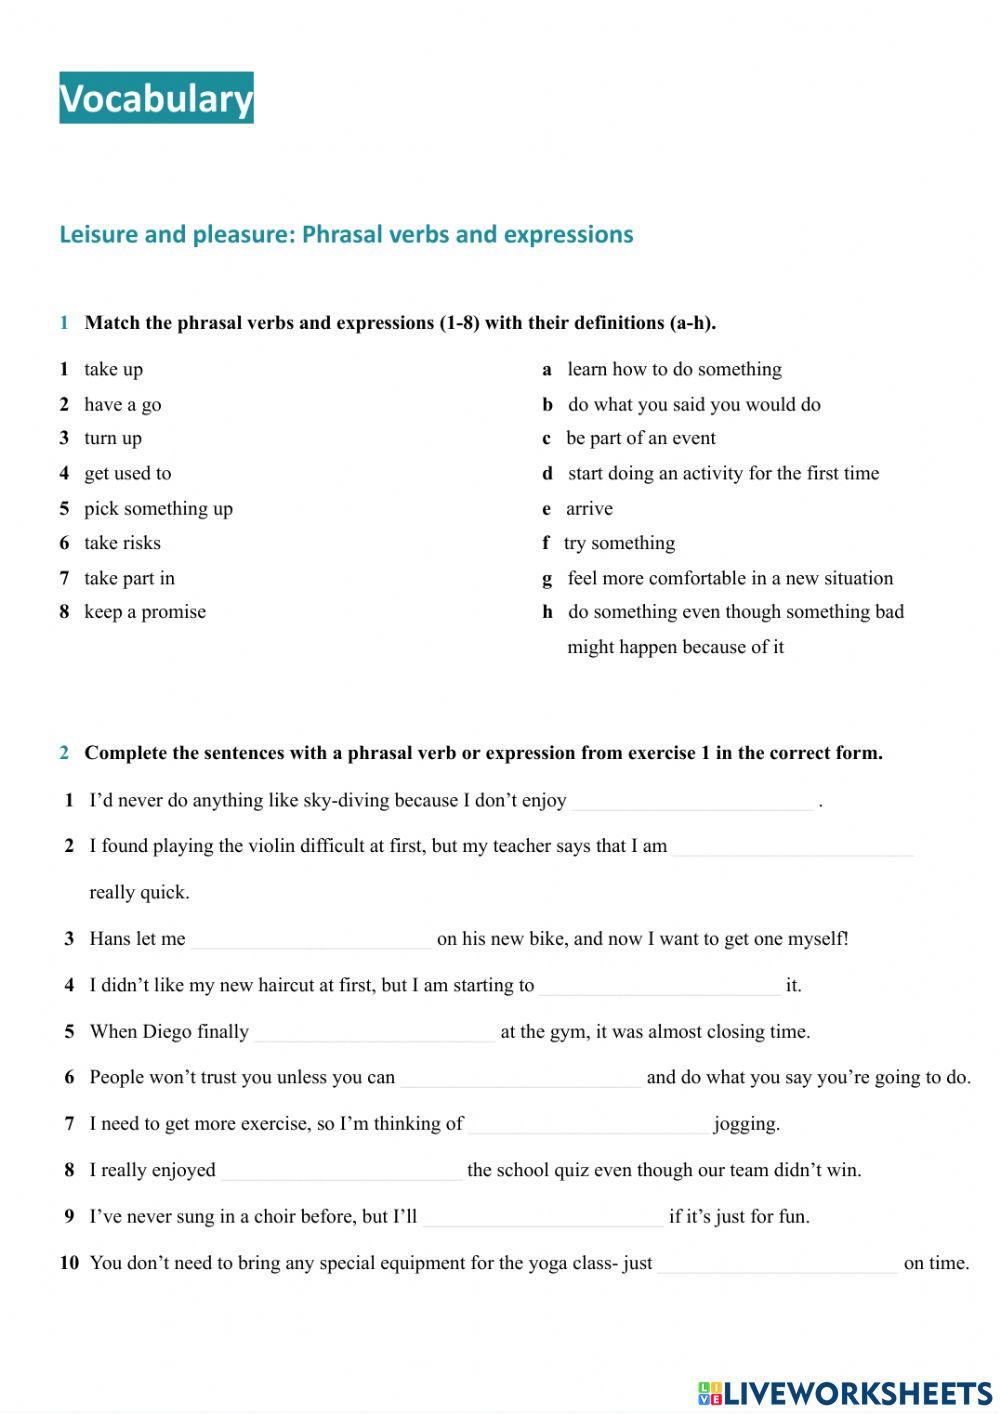 Phrasal verbs and expresions related to leisure.